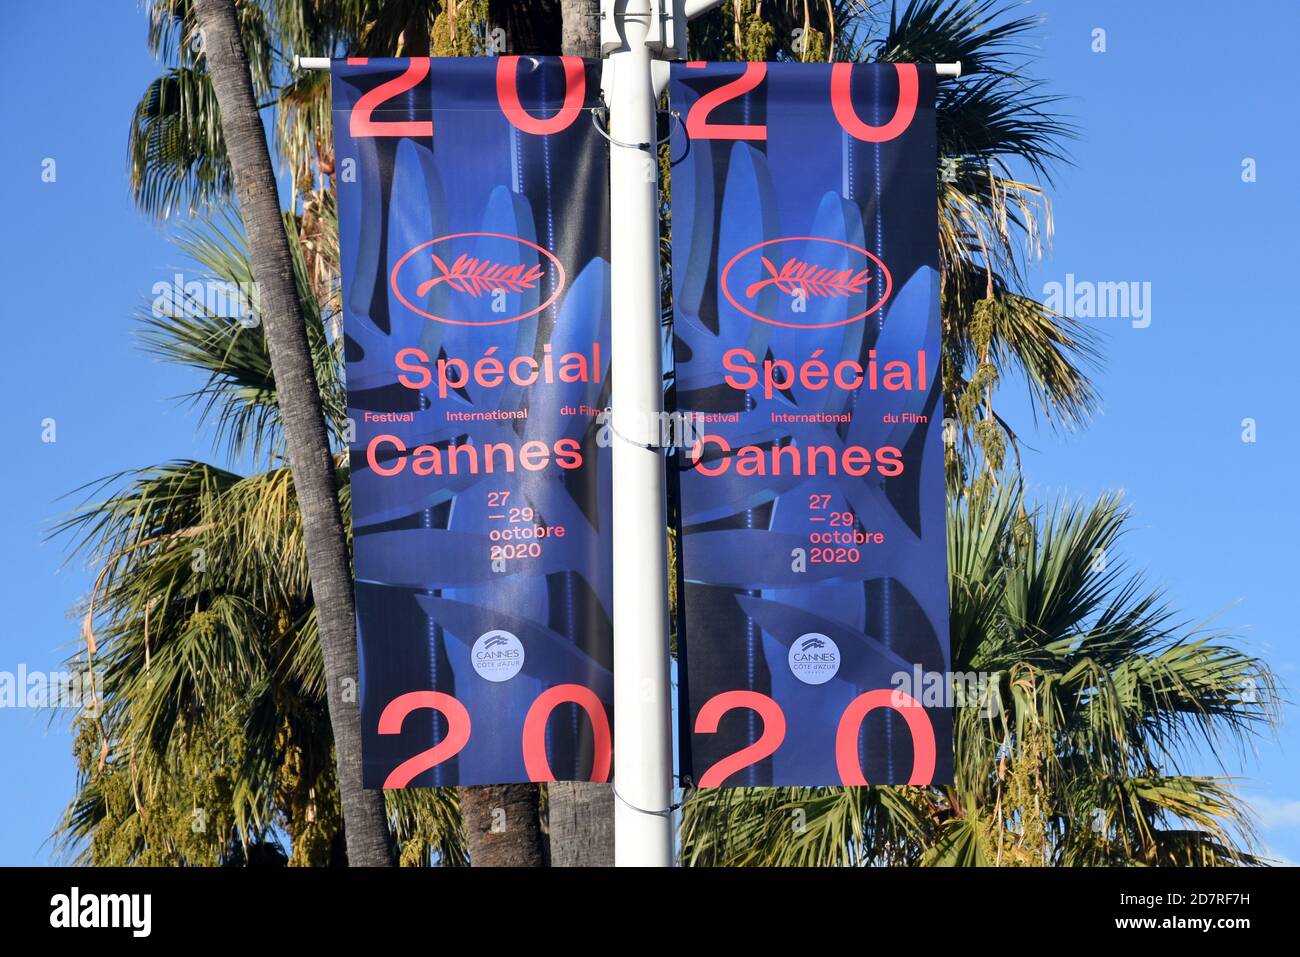 France, french riviera, Cannes, the advertising for the Special International Film Festival, the festival 2020 has been modified due the health crisis. Stock Photo